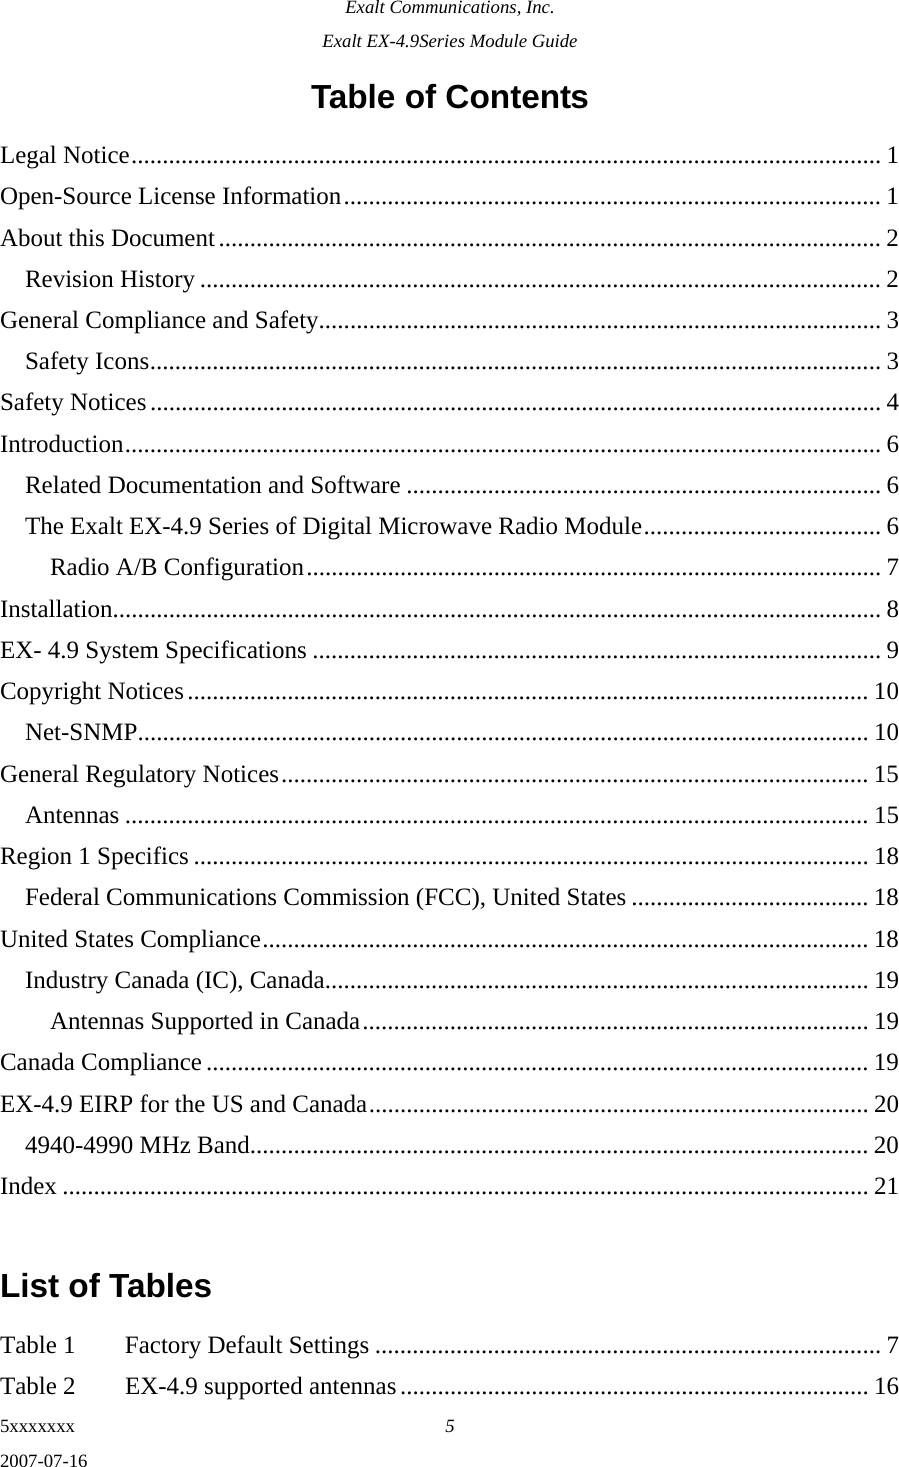 Exalt Communications, Inc. Exalt EX-4.9Series Module Guide 5xxxxxxx  5 2007-07-16 Table of Contents Legal Notice........................................................................................................................ 1 Open-Source License Information...................................................................................... 1 About this Document.......................................................................................................... 2 Revision History ............................................................................................................. 2 General Compliance and Safety.......................................................................................... 3 Safety Icons..................................................................................................................... 3 Safety Notices..................................................................................................................... 4 Introduction......................................................................................................................... 6 Related Documentation and Software ............................................................................ 6 The Exalt EX-4.9 Series of Digital Microwave Radio Module...................................... 6 Radio A/B Configuration............................................................................................ 7 Installation........................................................................................................................... 8 EX- 4.9 System Specifications ........................................................................................... 9 Copyright Notices............................................................................................................. 10 Net-SNMP..................................................................................................................... 10 General Regulatory Notices.............................................................................................. 15 Antennas ....................................................................................................................... 15 Region 1 Specifics ............................................................................................................ 18 Federal Communications Commission (FCC), United States ...................................... 18 United States Compliance................................................................................................. 18 Industry Canada (IC), Canada....................................................................................... 19 Antennas Supported in Canada................................................................................. 19 Canada Compliance .......................................................................................................... 19 EX-4.9 EIRP for the US and Canada................................................................................ 20 4940-4990 MHz Band................................................................................................... 20 Index ................................................................................................................................. 21  List of Tables  Table 1  Factory Default Settings ................................................................................. 7 Table 2  EX-4.9 supported antennas........................................................................... 16 